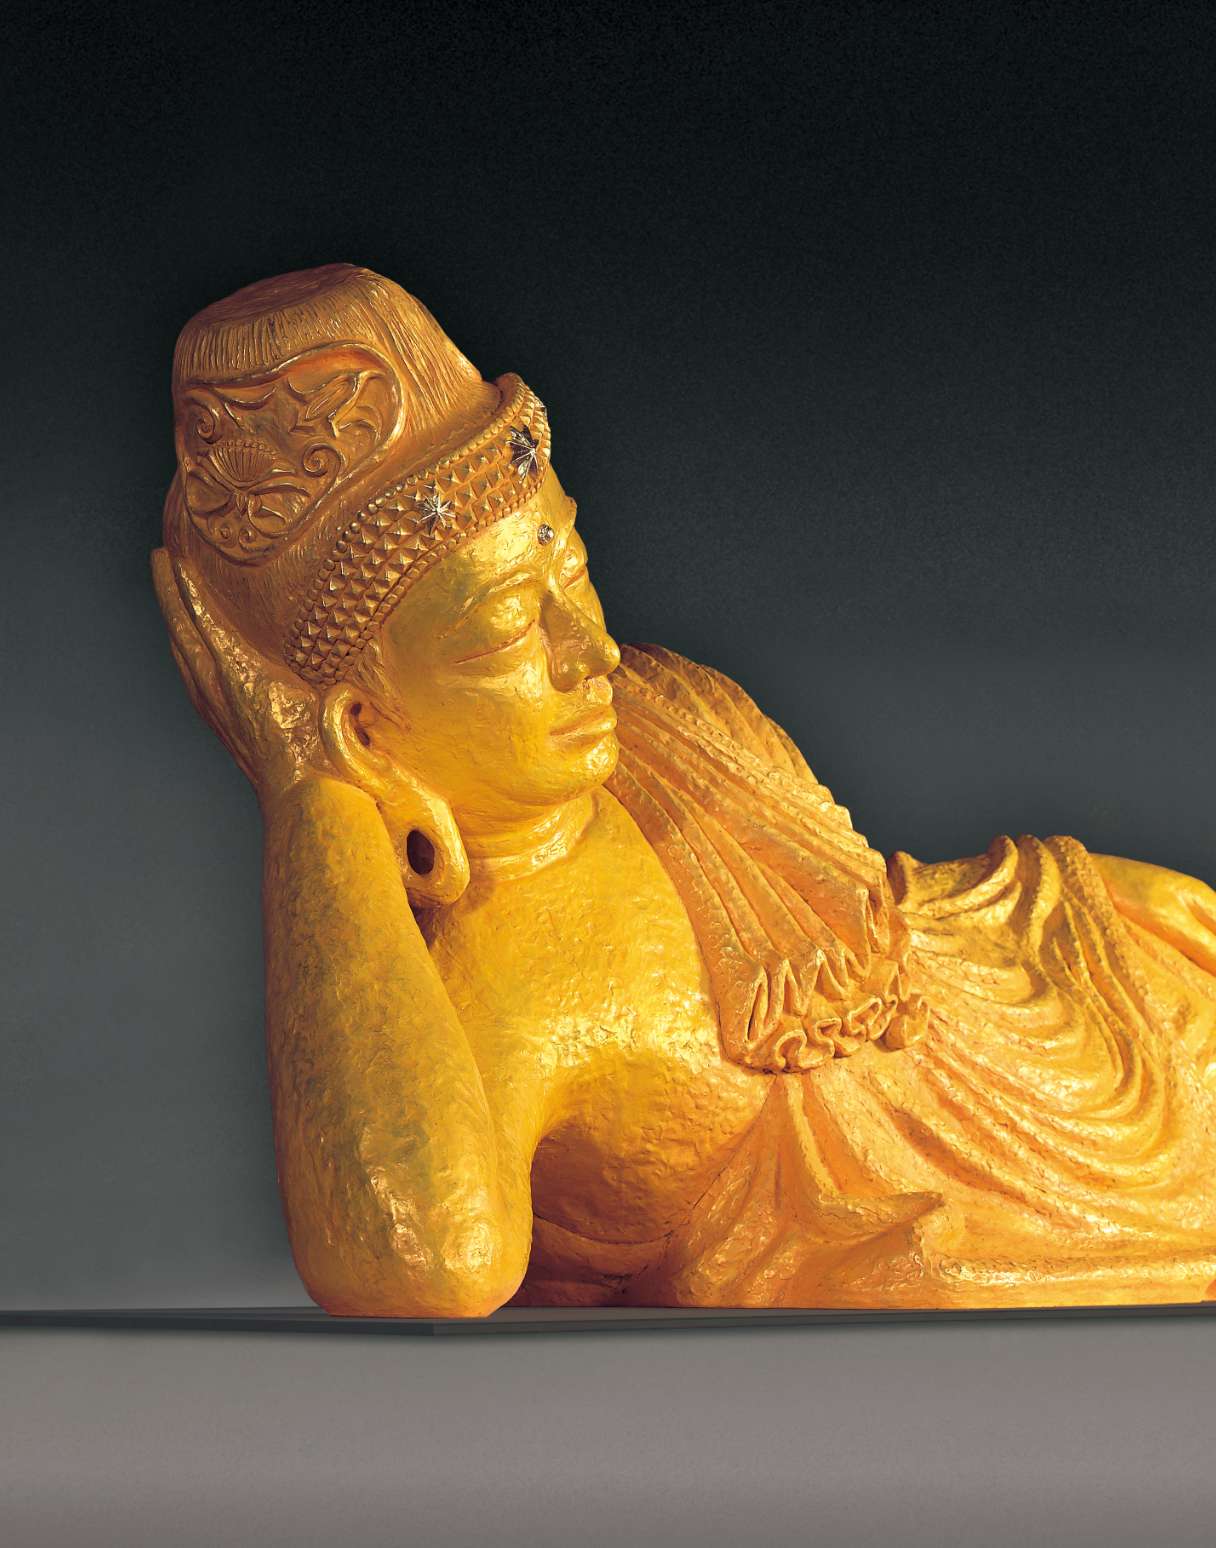 A closeup of the face of a golden colored reclining Buddha sculpture shows a slight smile on his lips; decorative details of the headpiece he wears are visible.